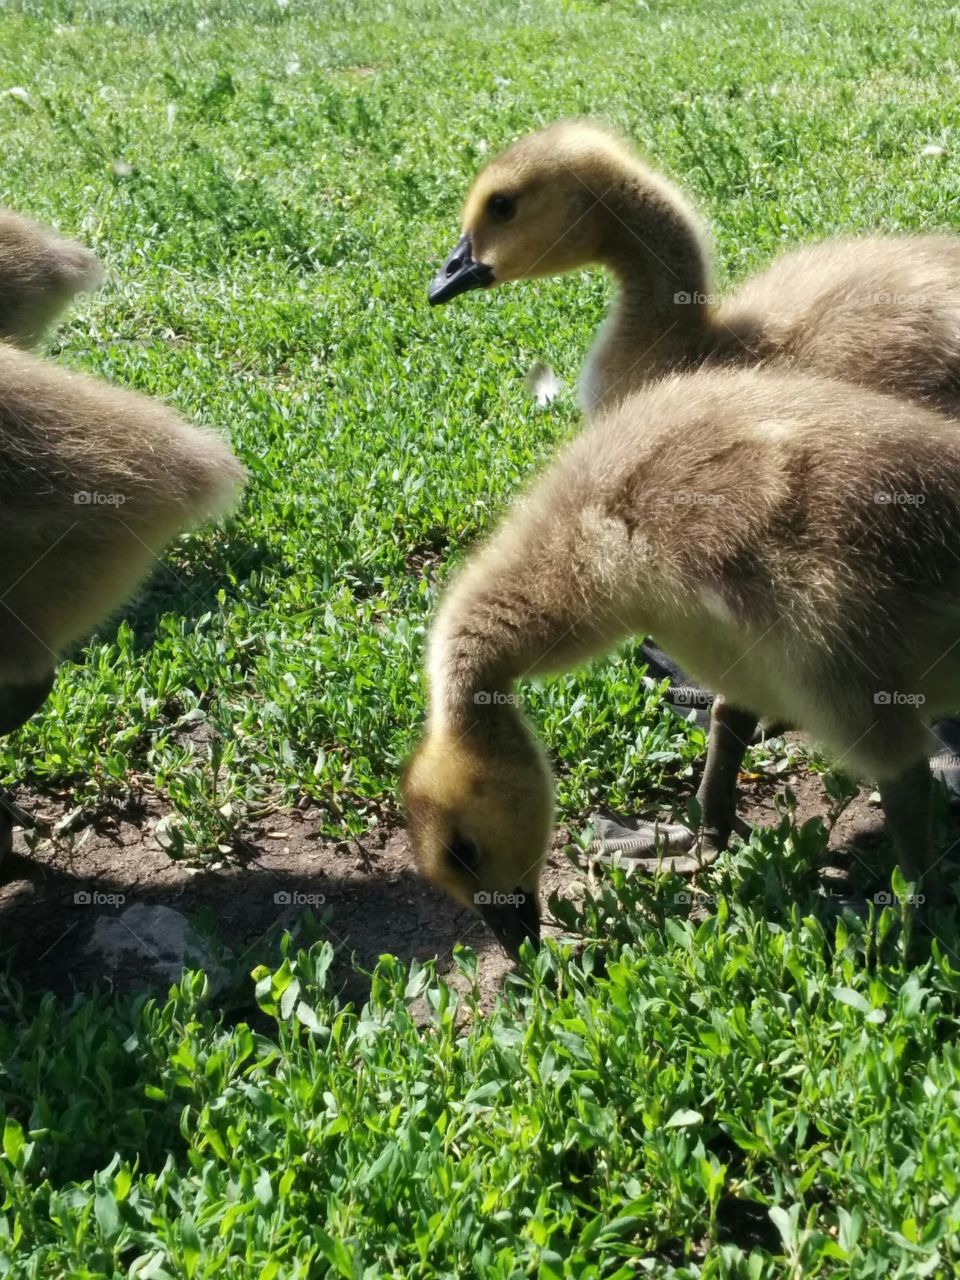 Baby geese eating. Four baby geese's eating in a row